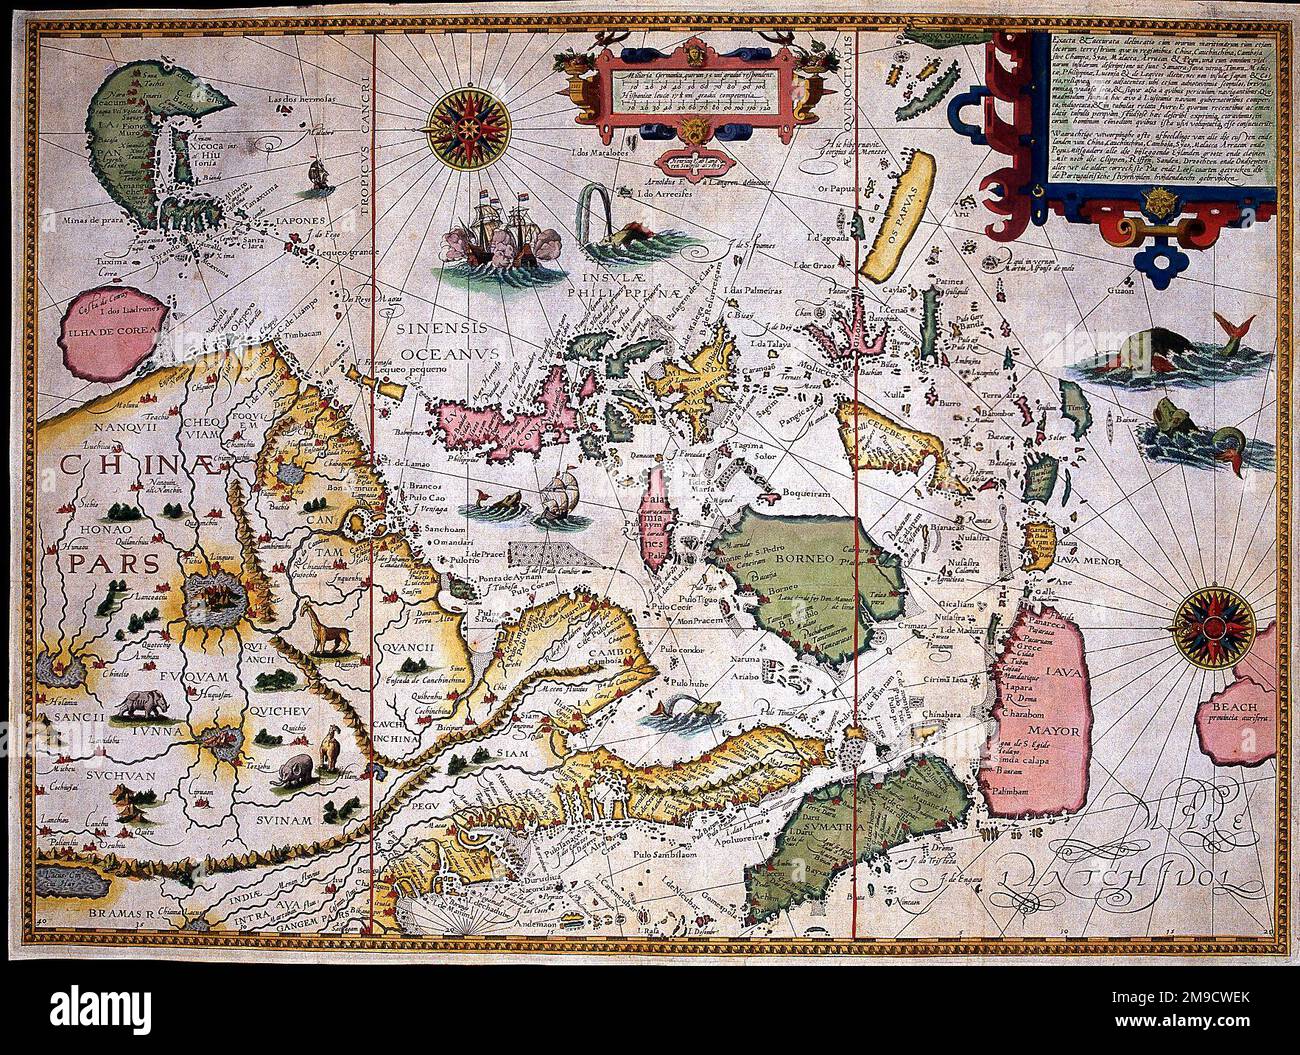 16th century Map of China and South East Asia, Siam, Borneo, Indonesia, Philippines and Japan Stock Photo